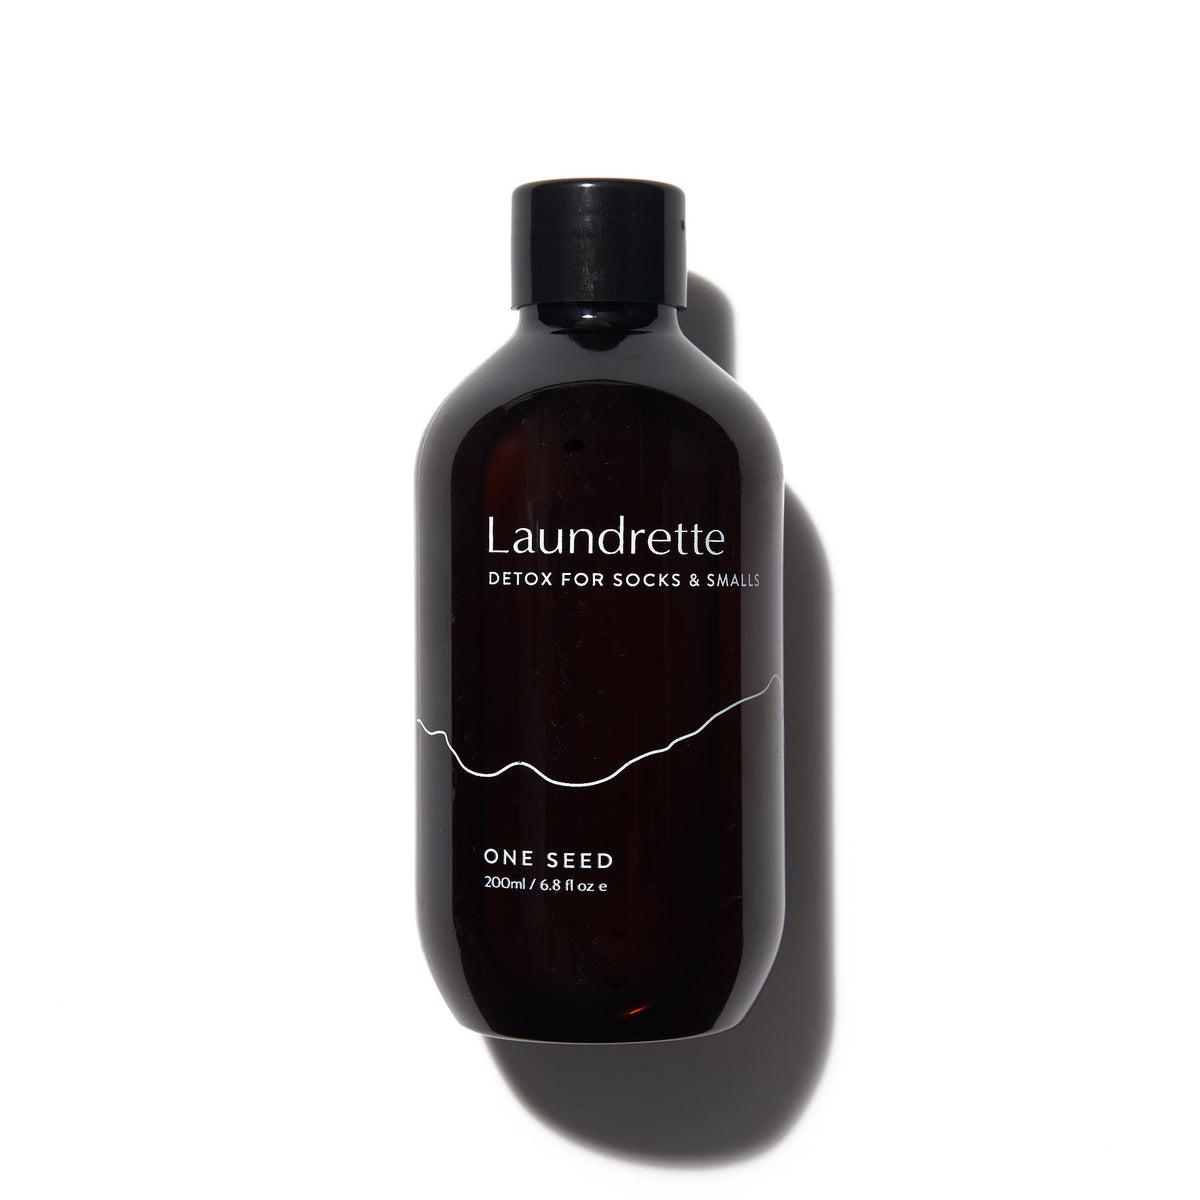 One Seed - Laundrette Detox for Socks and Smalls 200ml - The Bare Theory